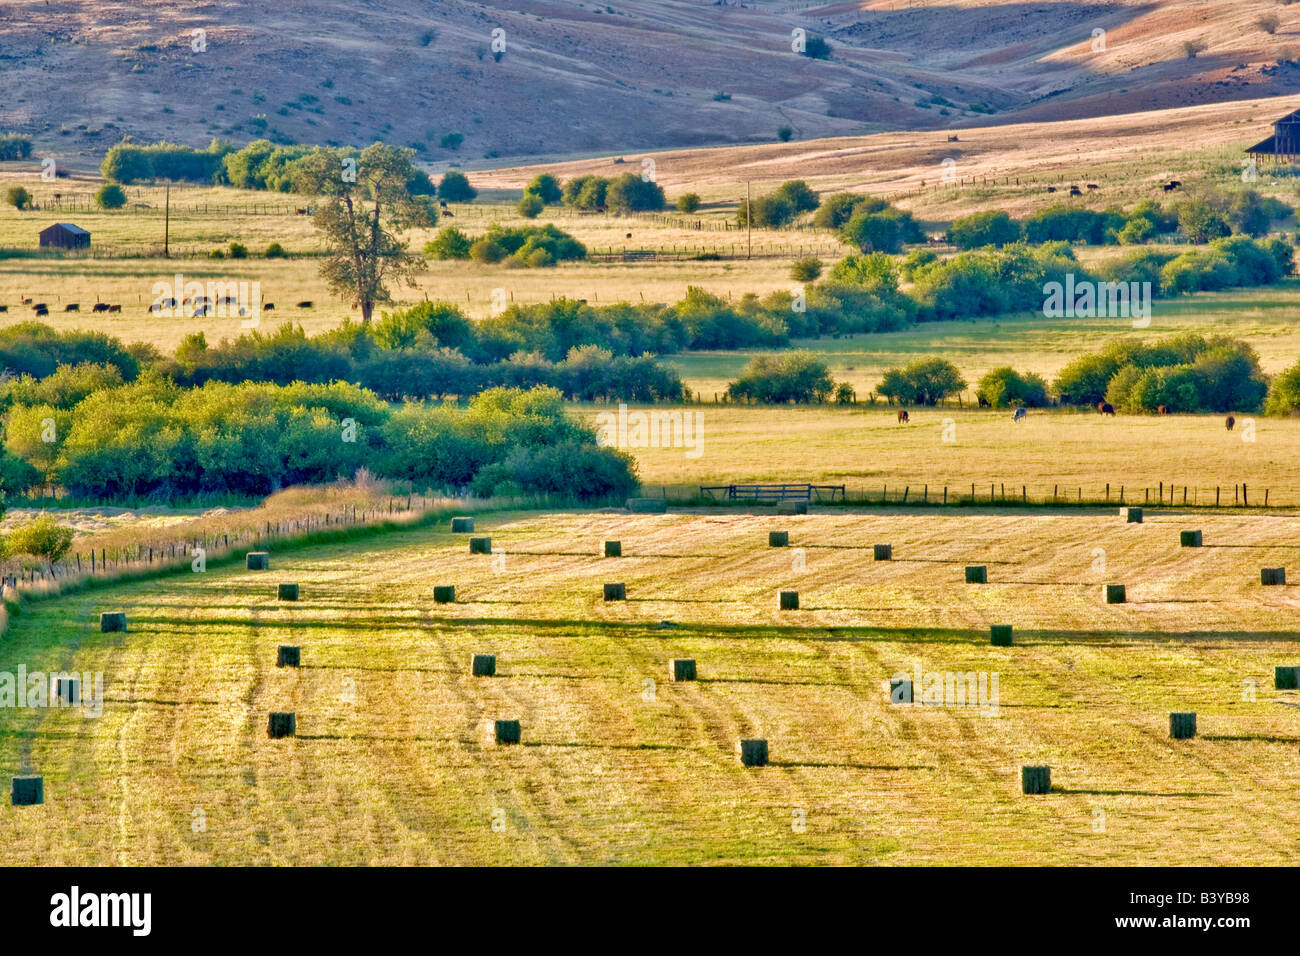 Large bails of hay and cattle in pasture Near Halfway Oregon Stock Photo